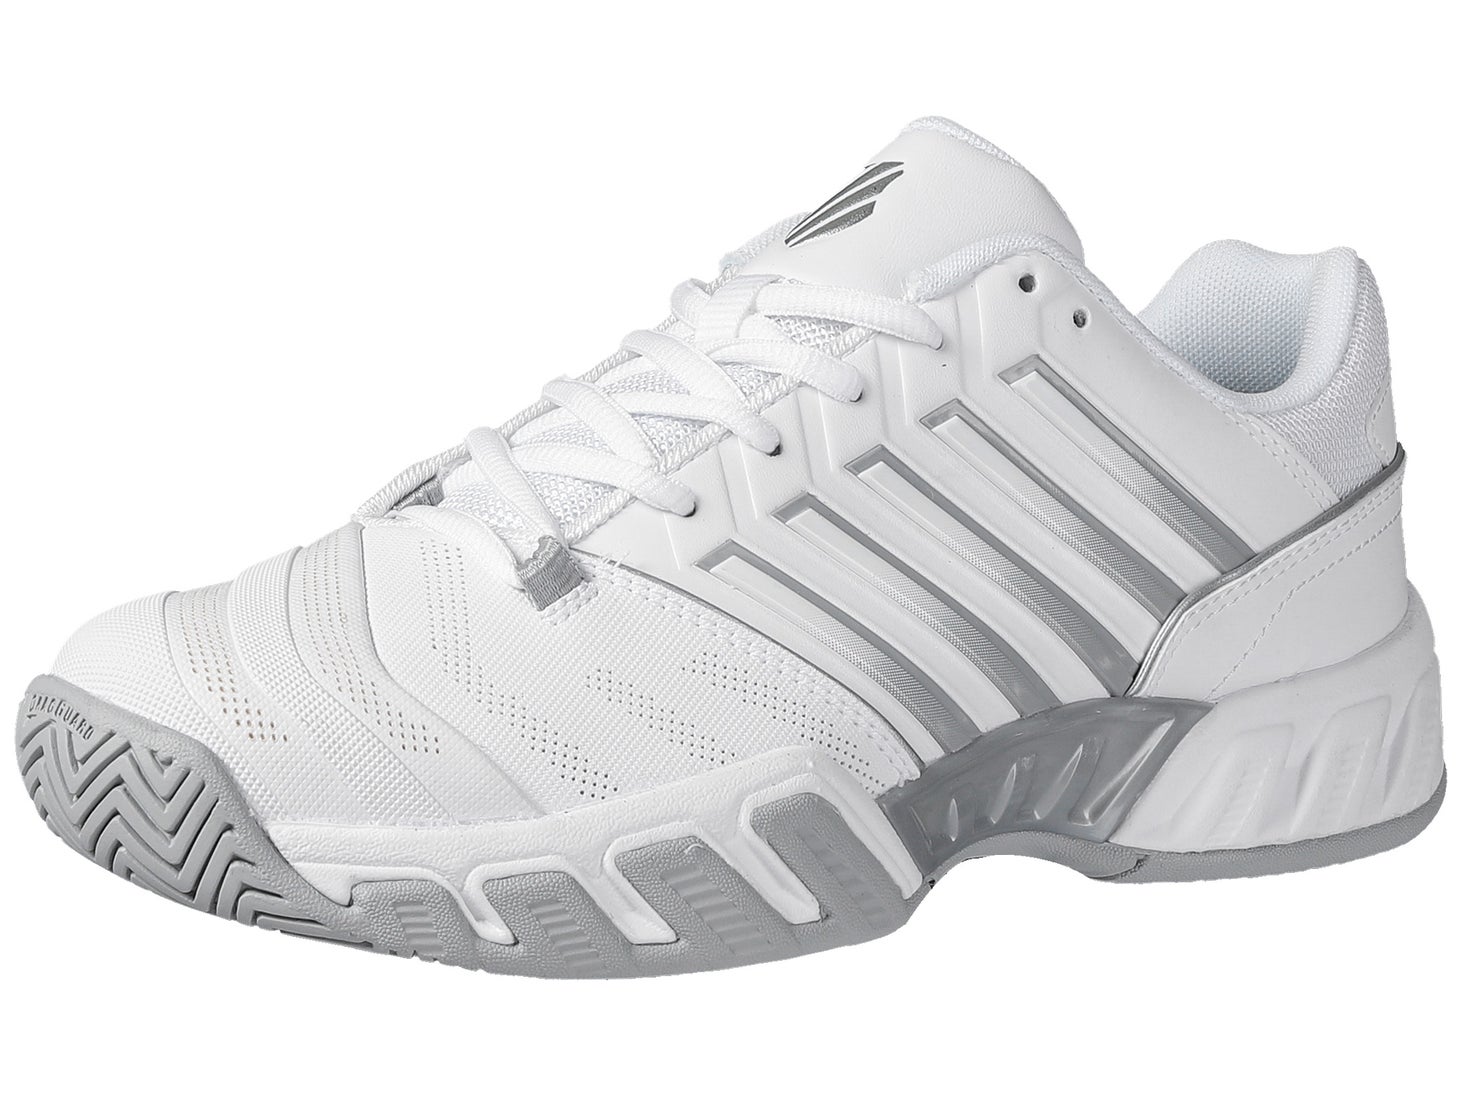 KSwiss Bigshot Light 4 White Silver Women's Shoes | Tennis Only